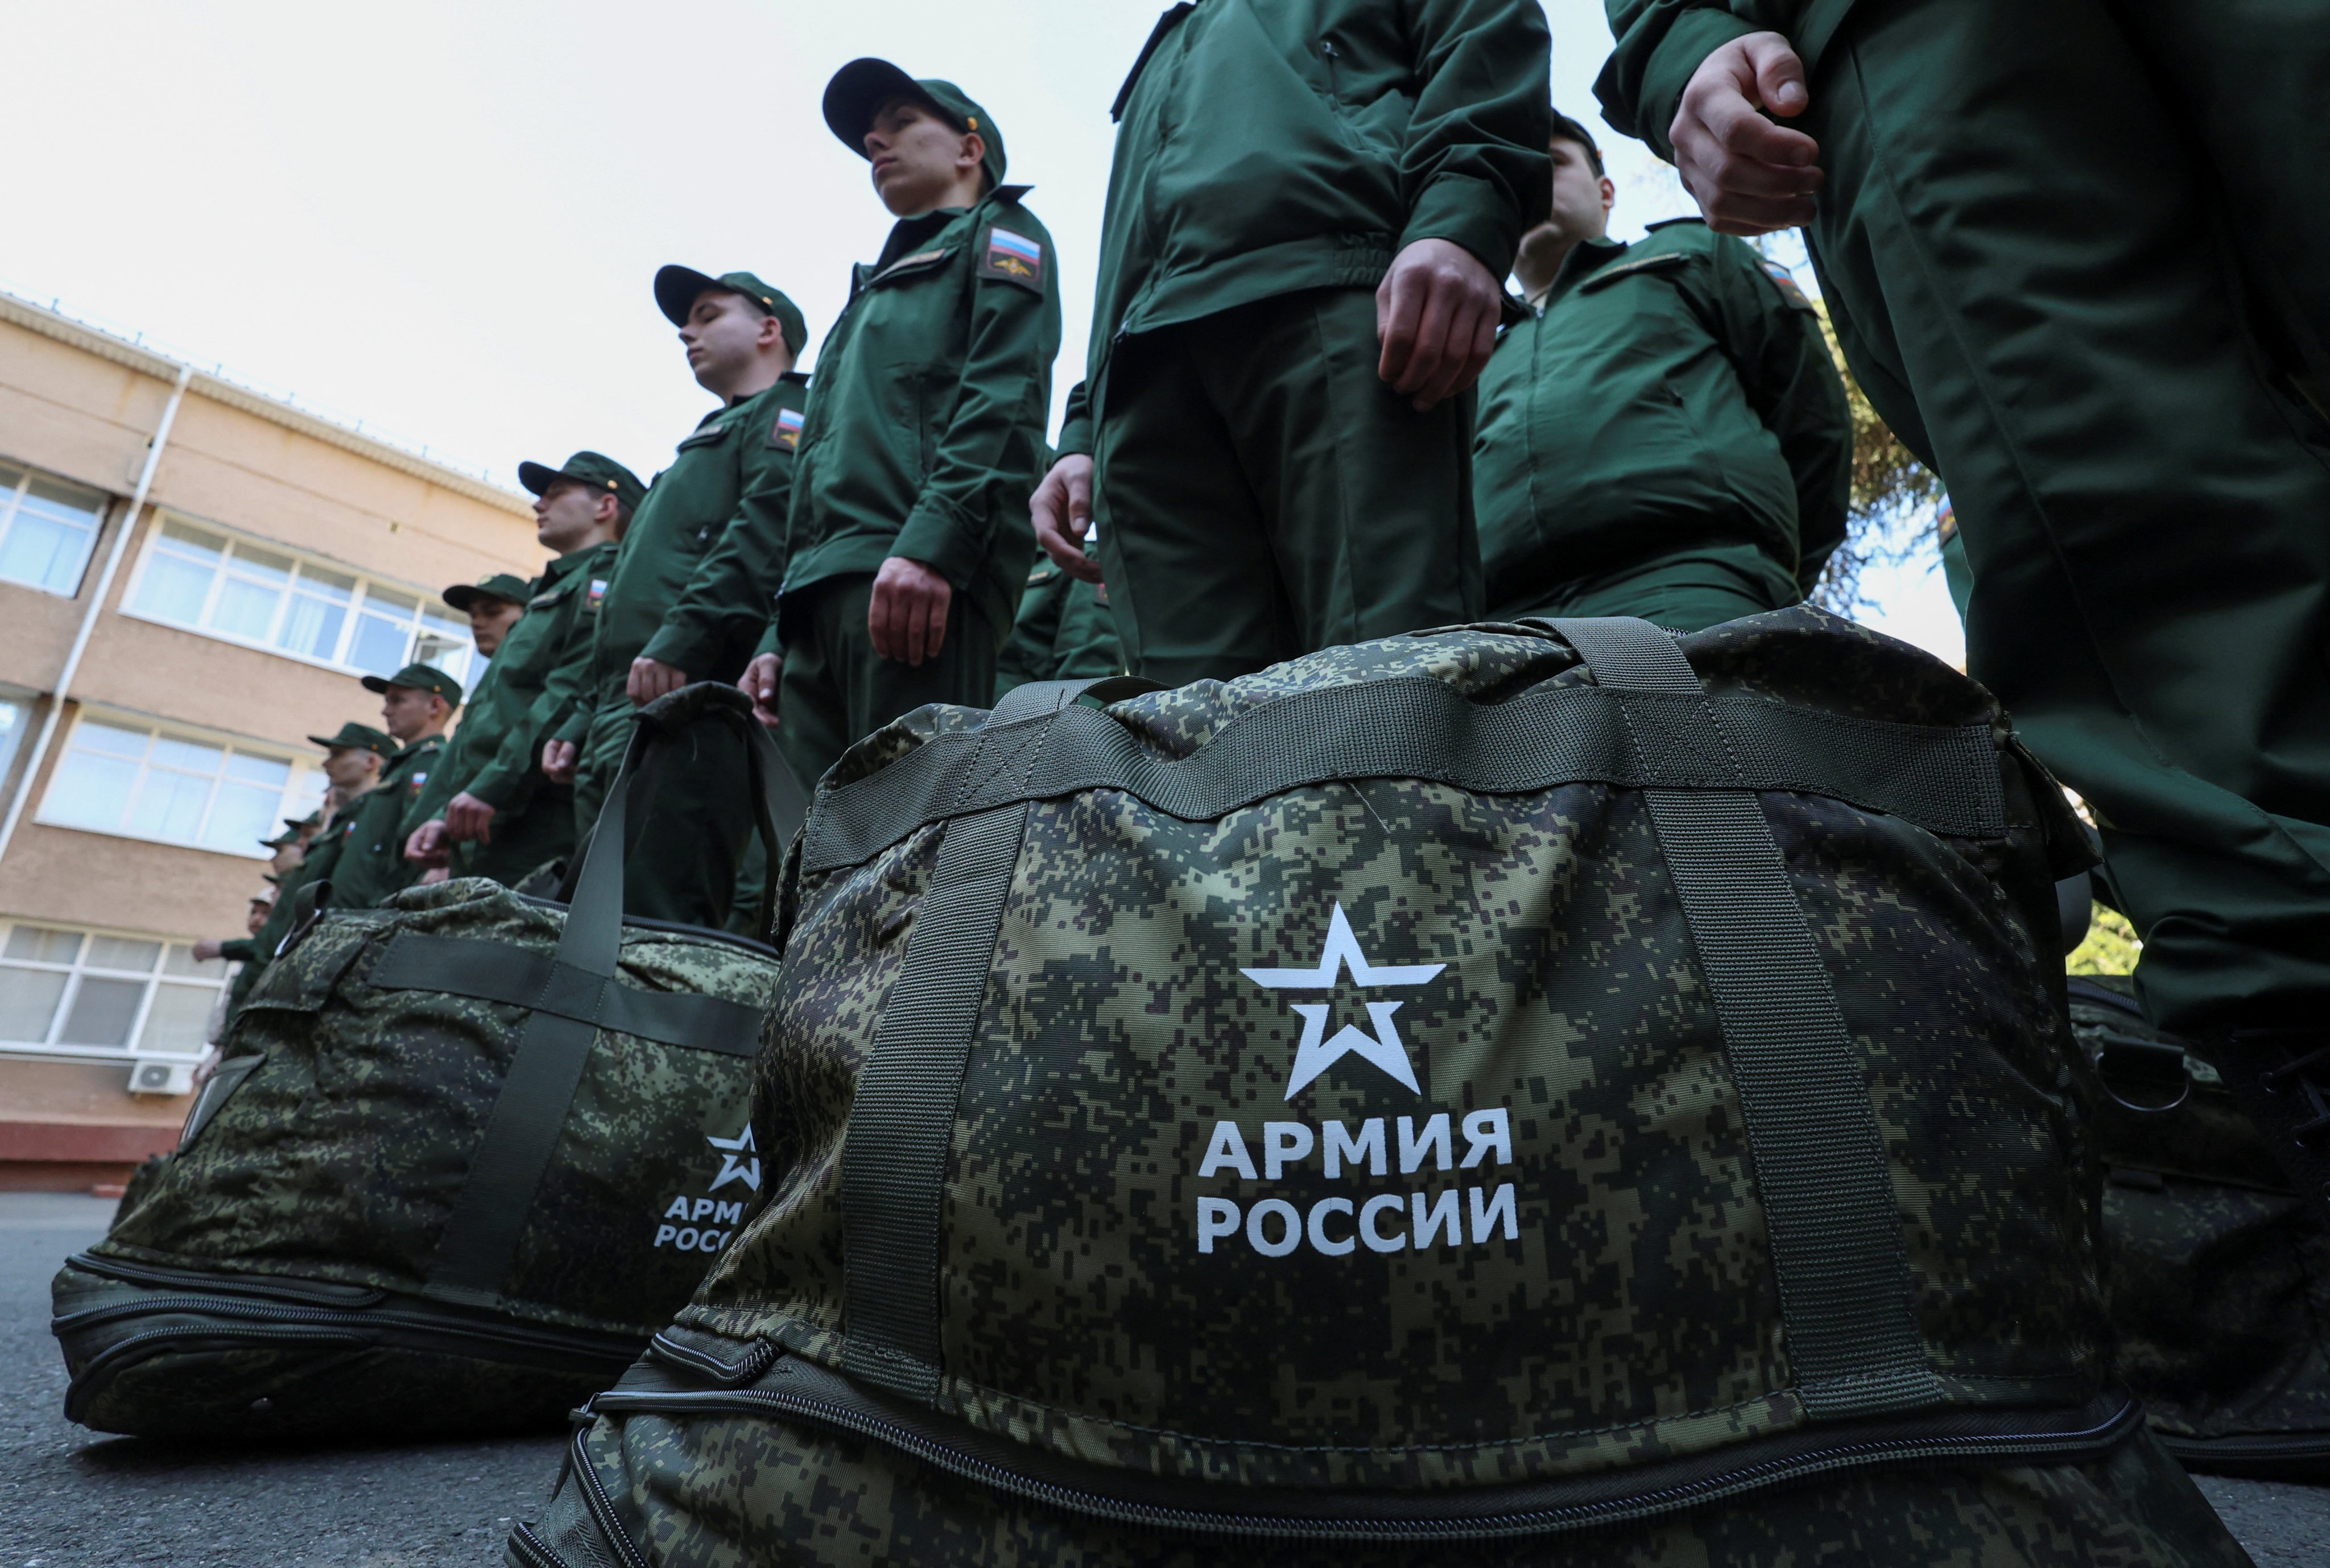 Russian conscripts called up for military service line up before their departure for garrisons as they gather at a recruitment centre in Simferopol, Crimea on April 25, 2023. Signs on bags read: “Army of Russia”. Photo: Reuters